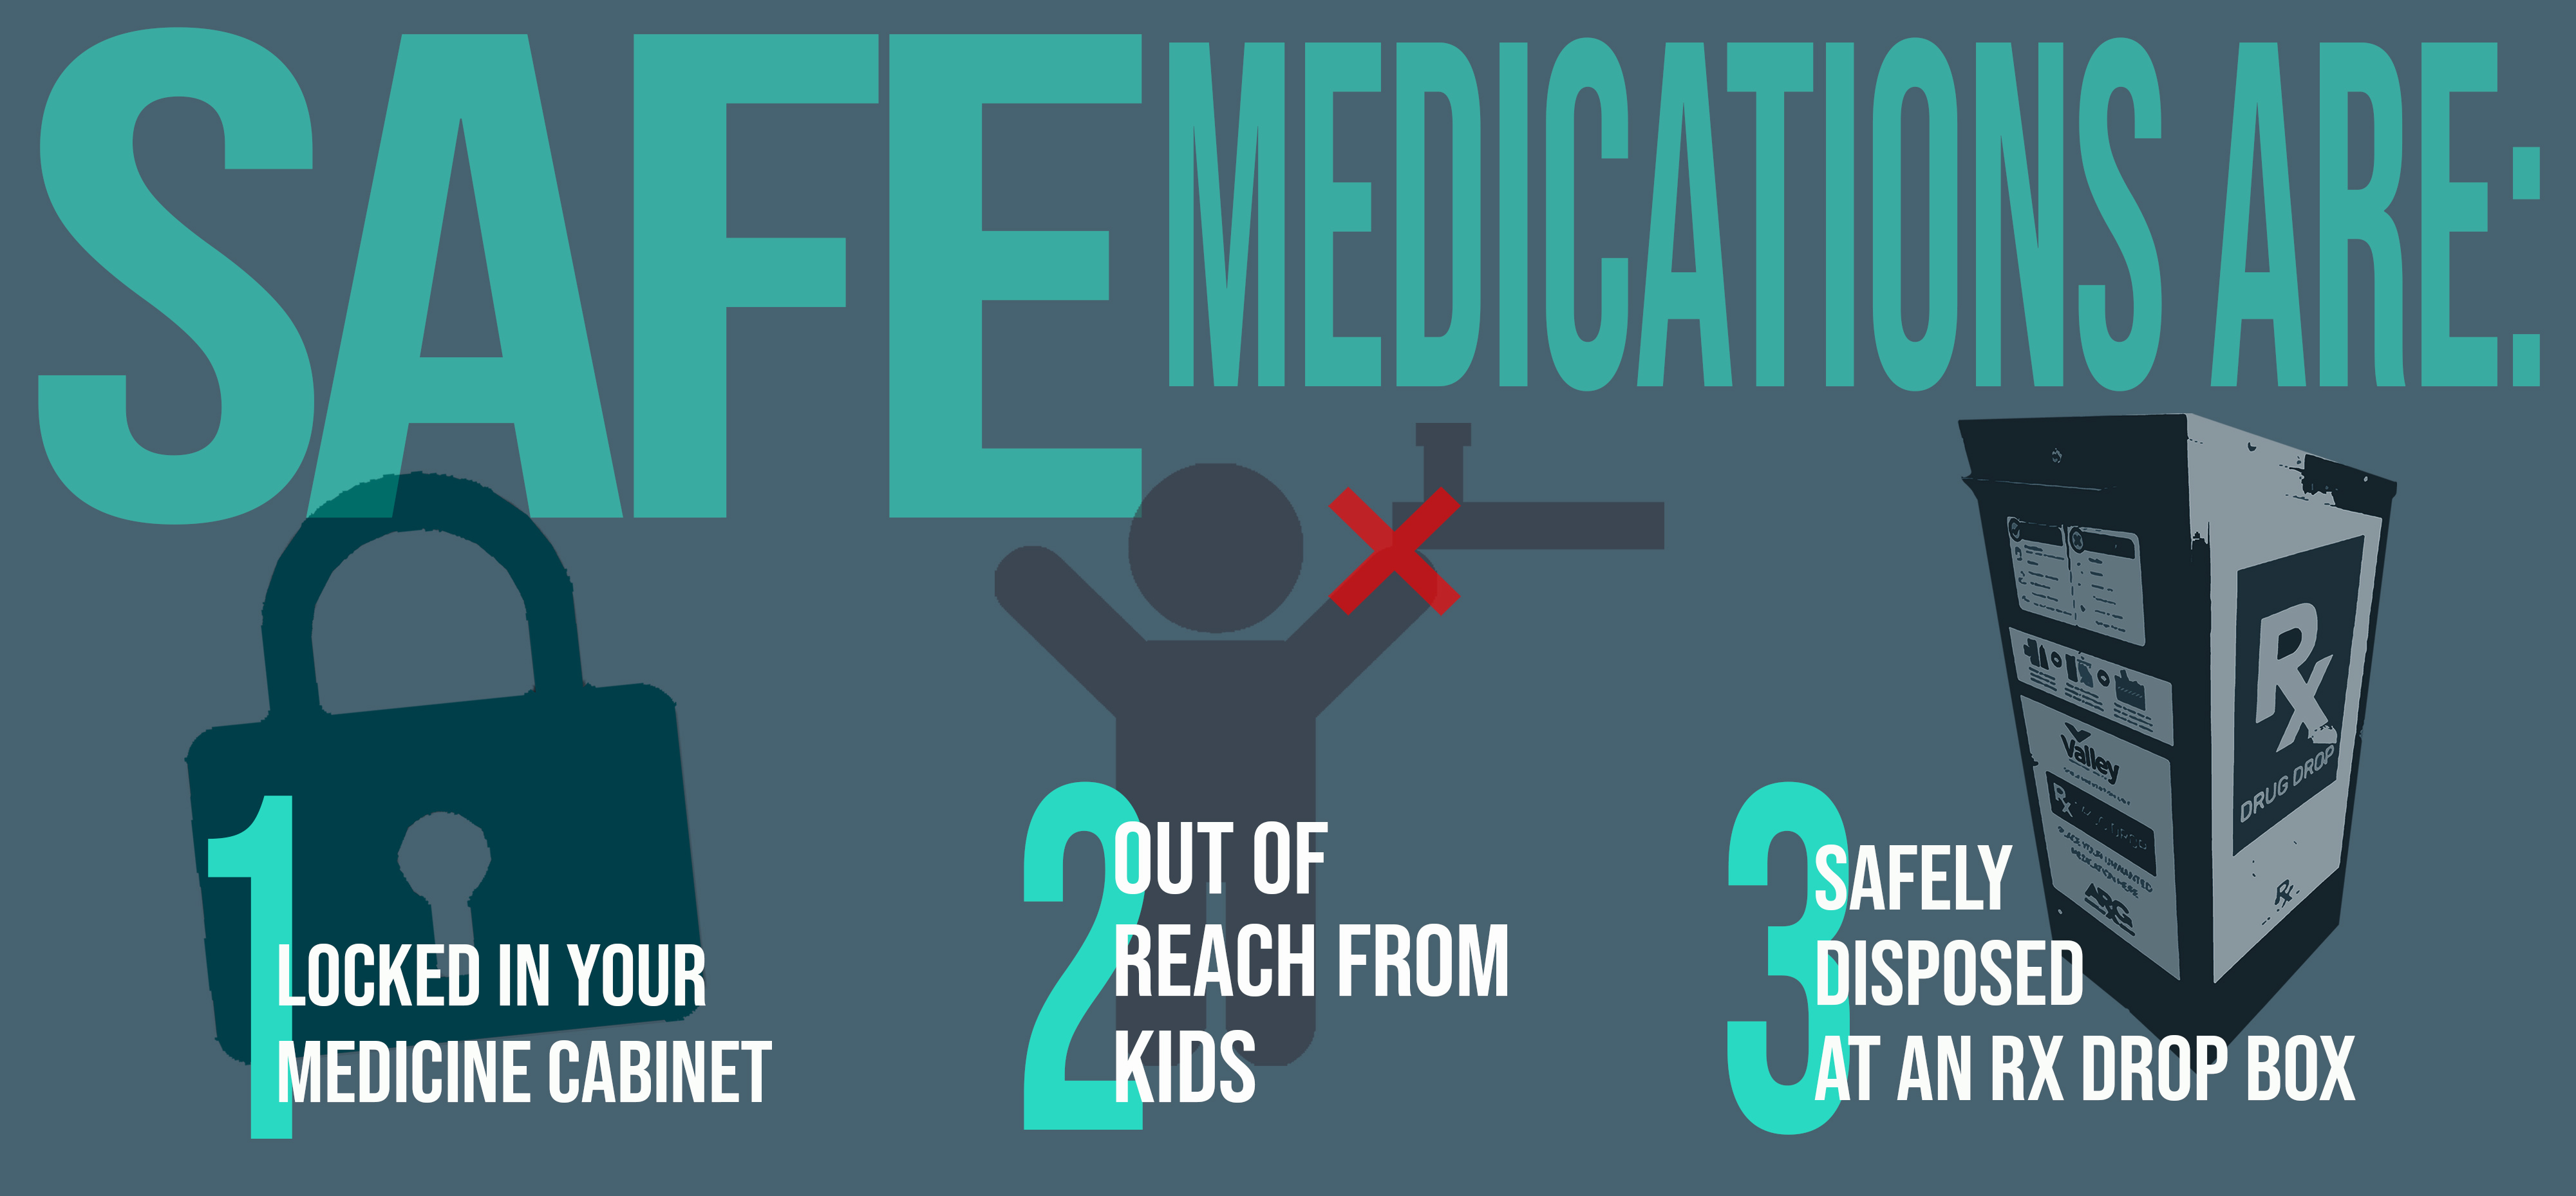 Safe medications are: 1 Locked in your medicine cabinet, 2 out of reach from kids, 3 Safely disposed at an Rx drop box